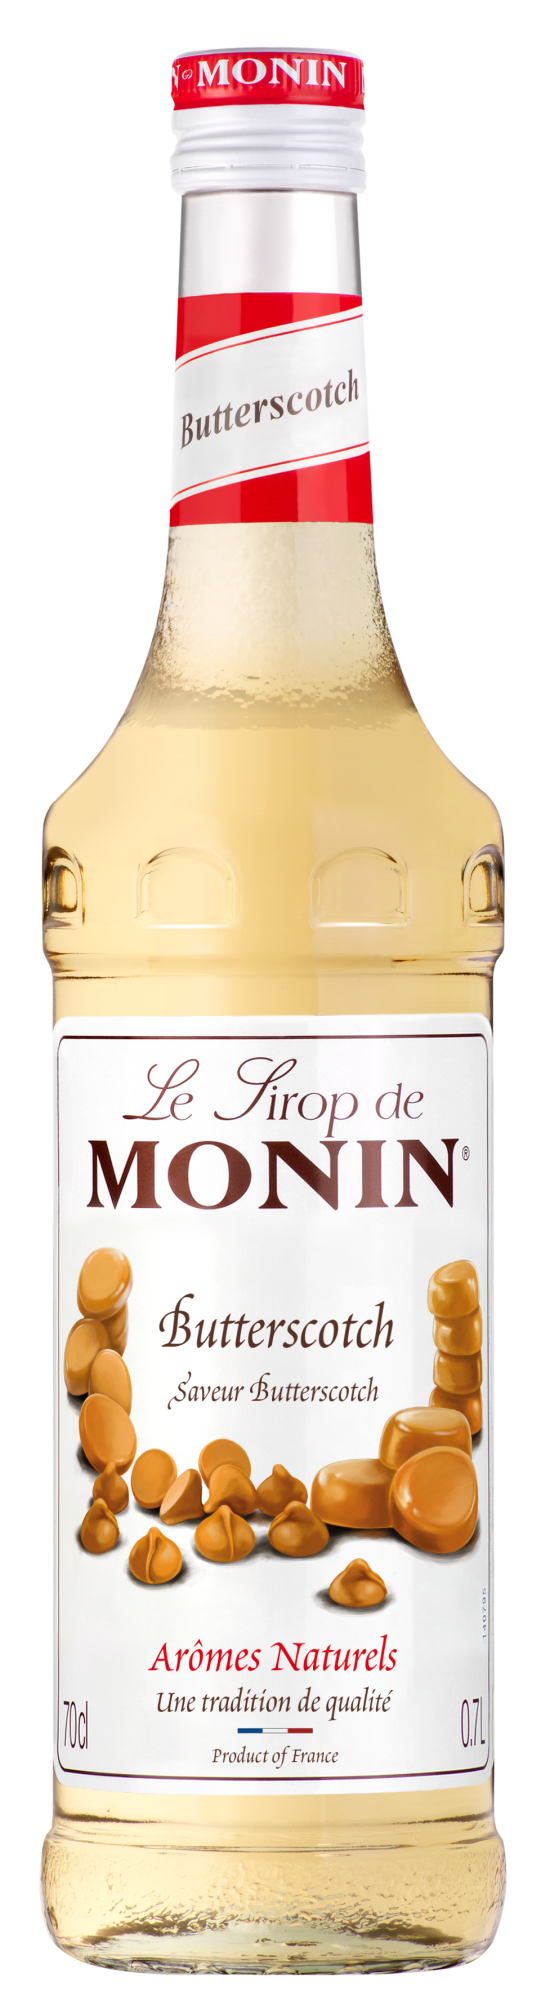 Buy MONIN Butterscotch Syrup. It captures the creamy buttery caramel notes associated with Butterscotch sweets.